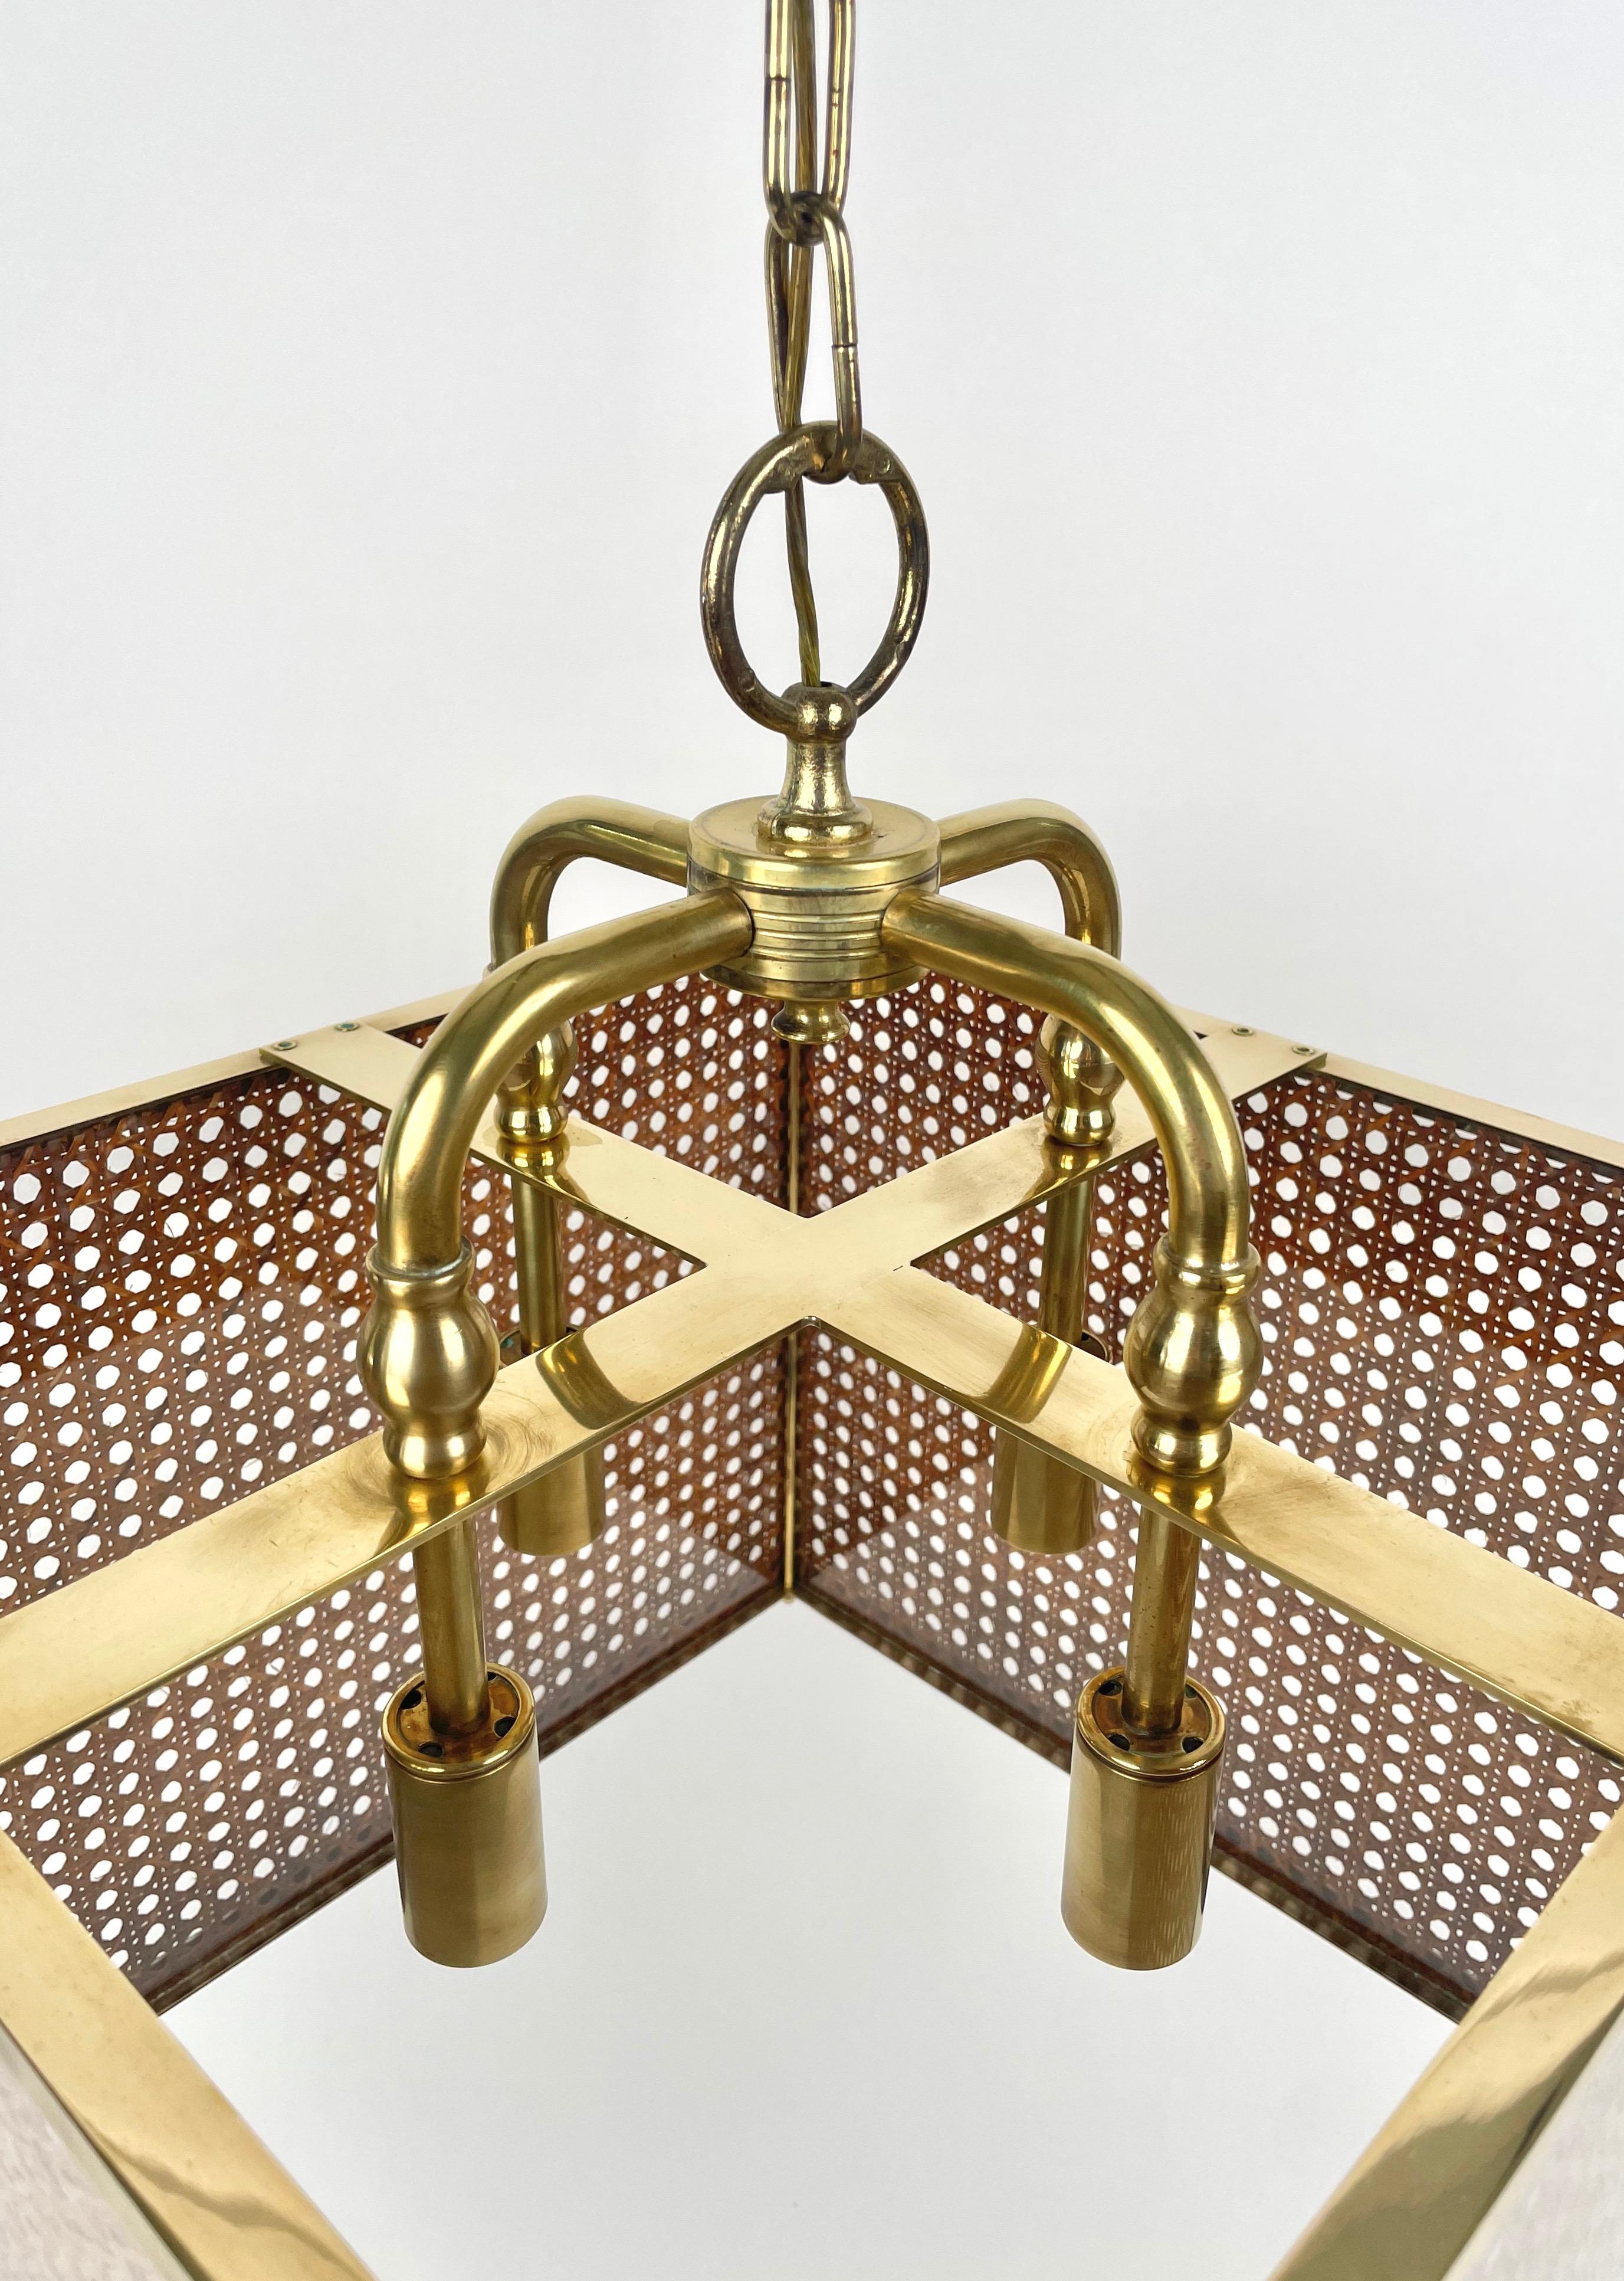 Rattan, Brass and Glass Chandelier Four-Light, Italy 1970s For Sale 1